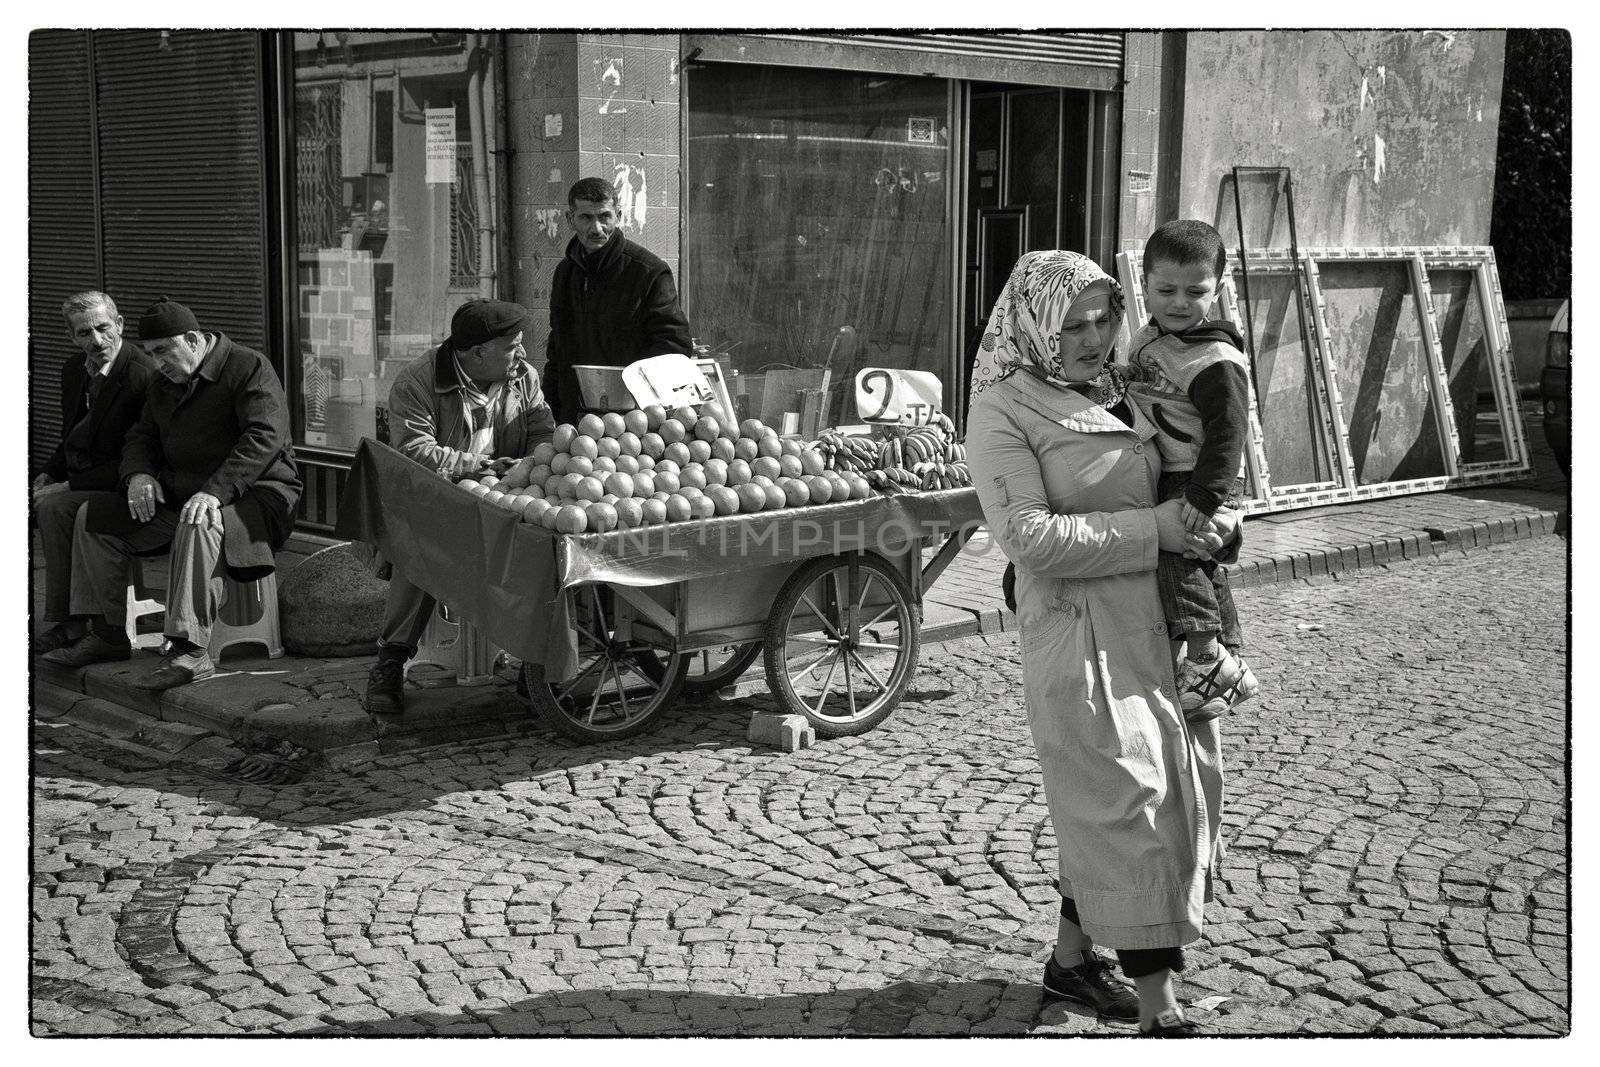 TURKISH MOTHER AND CHILD, ISTANBUL, TURKEY, APRIL 11, 2012: Mother and child passing vendor greengrocer in the Fatih district of Istanbul, Turkey.